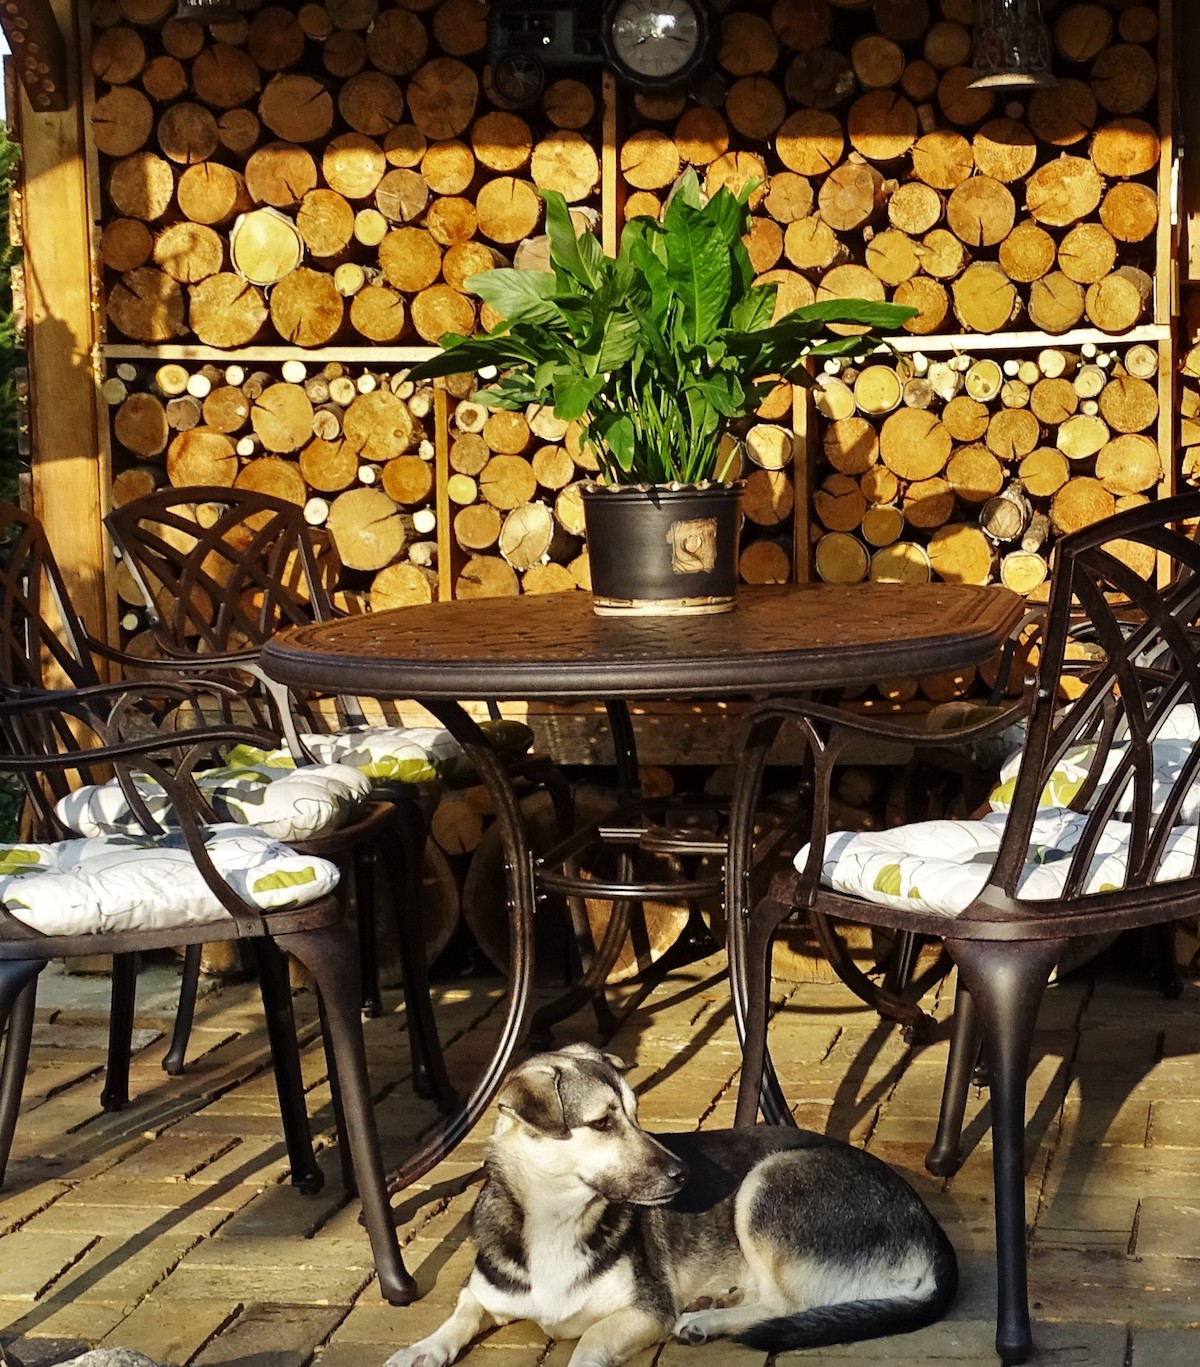 When is the best time to buy new garden furniture from Lazy Susan?